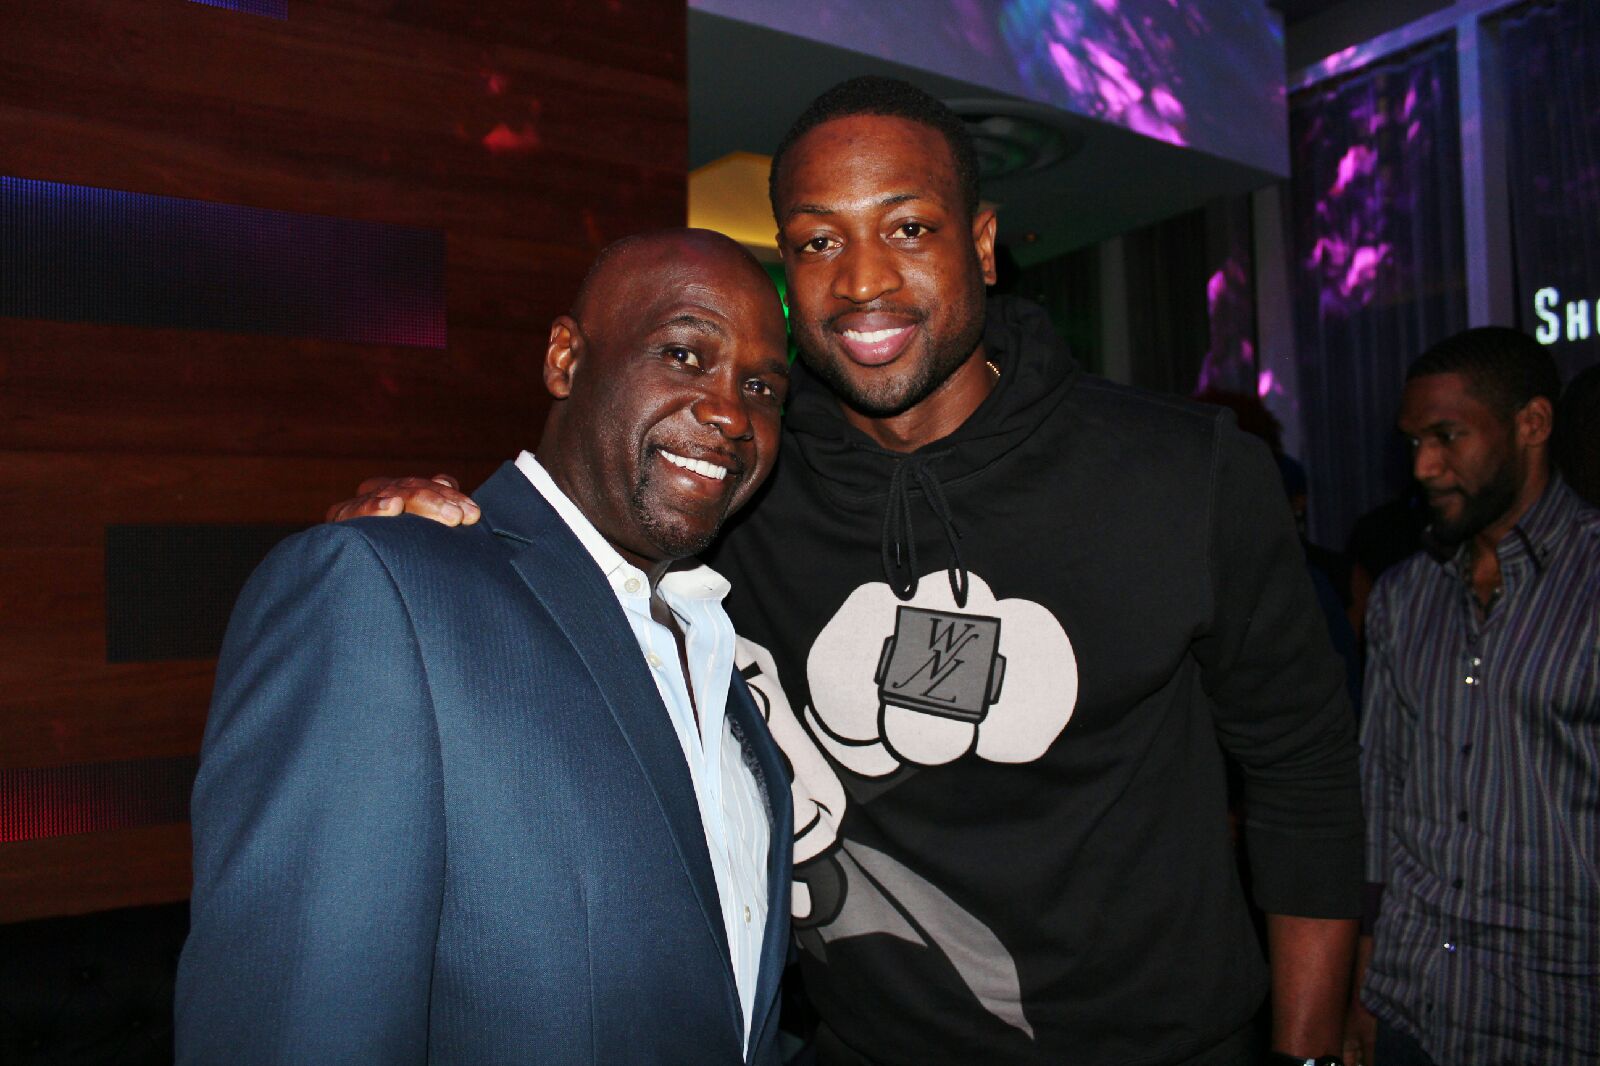 D.Mack and D.Wade and Temptations Miami Lounge